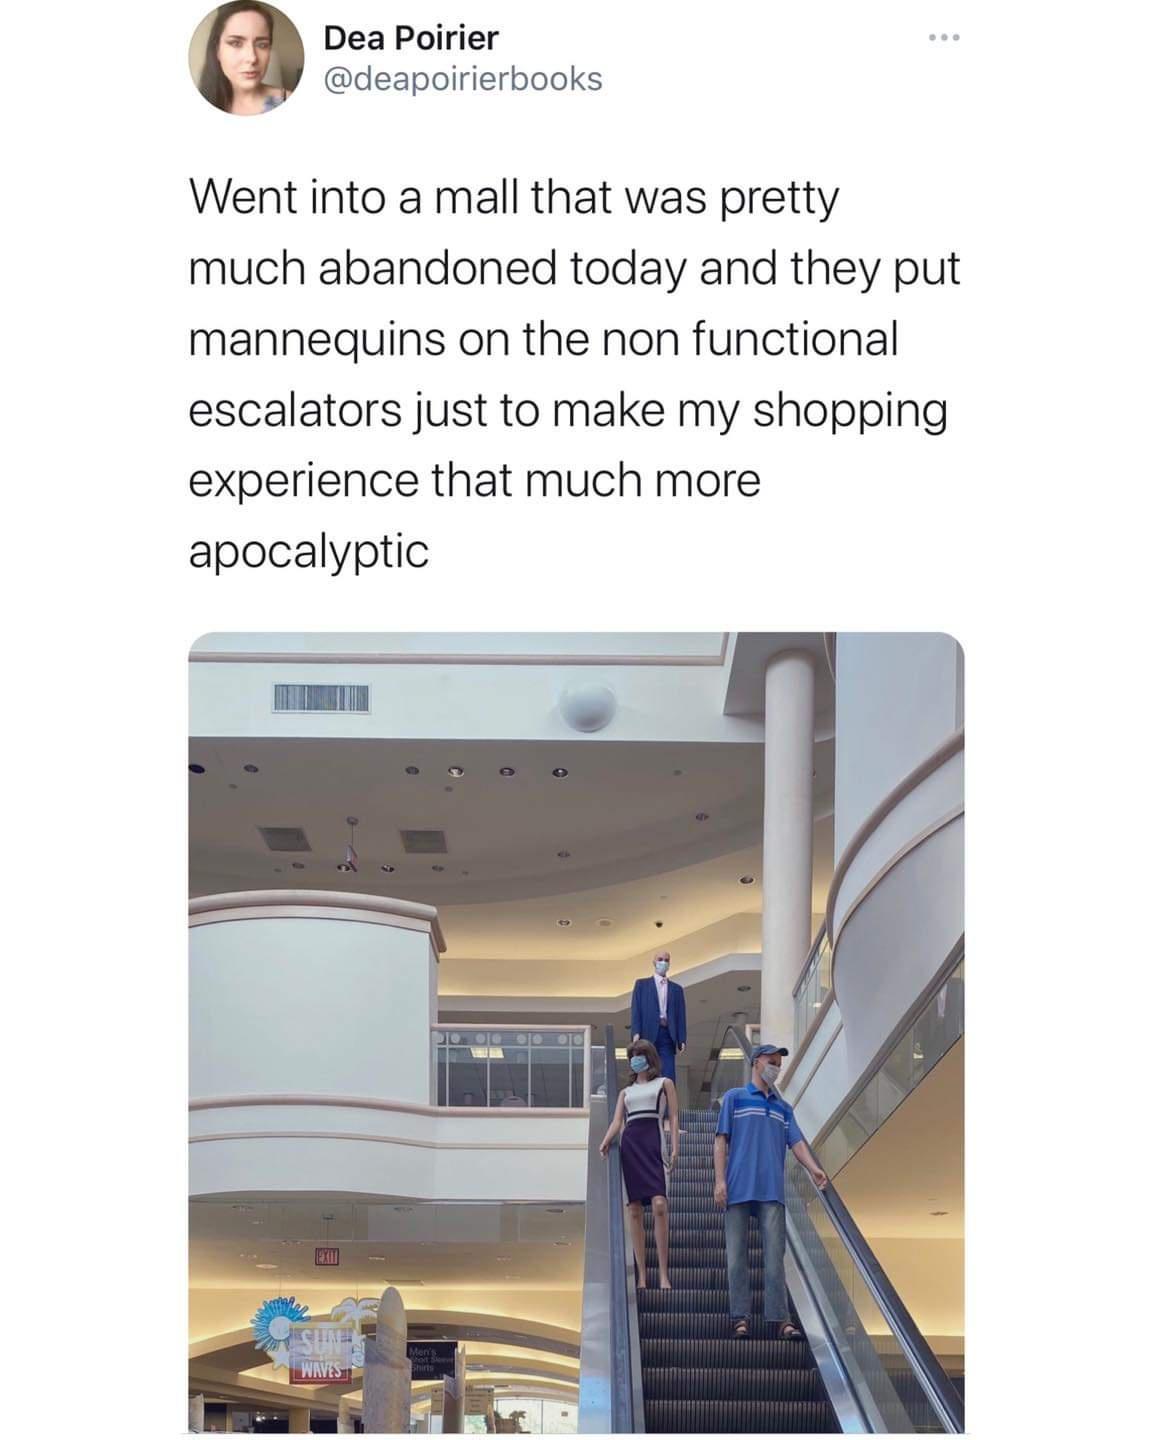 angle - ... .. Dea Poirier Went into a mall that was pretty much abandoned today and they put mannequins on the non functional escalators just to make my shopping experience that much more apocalyptic Meni Waves